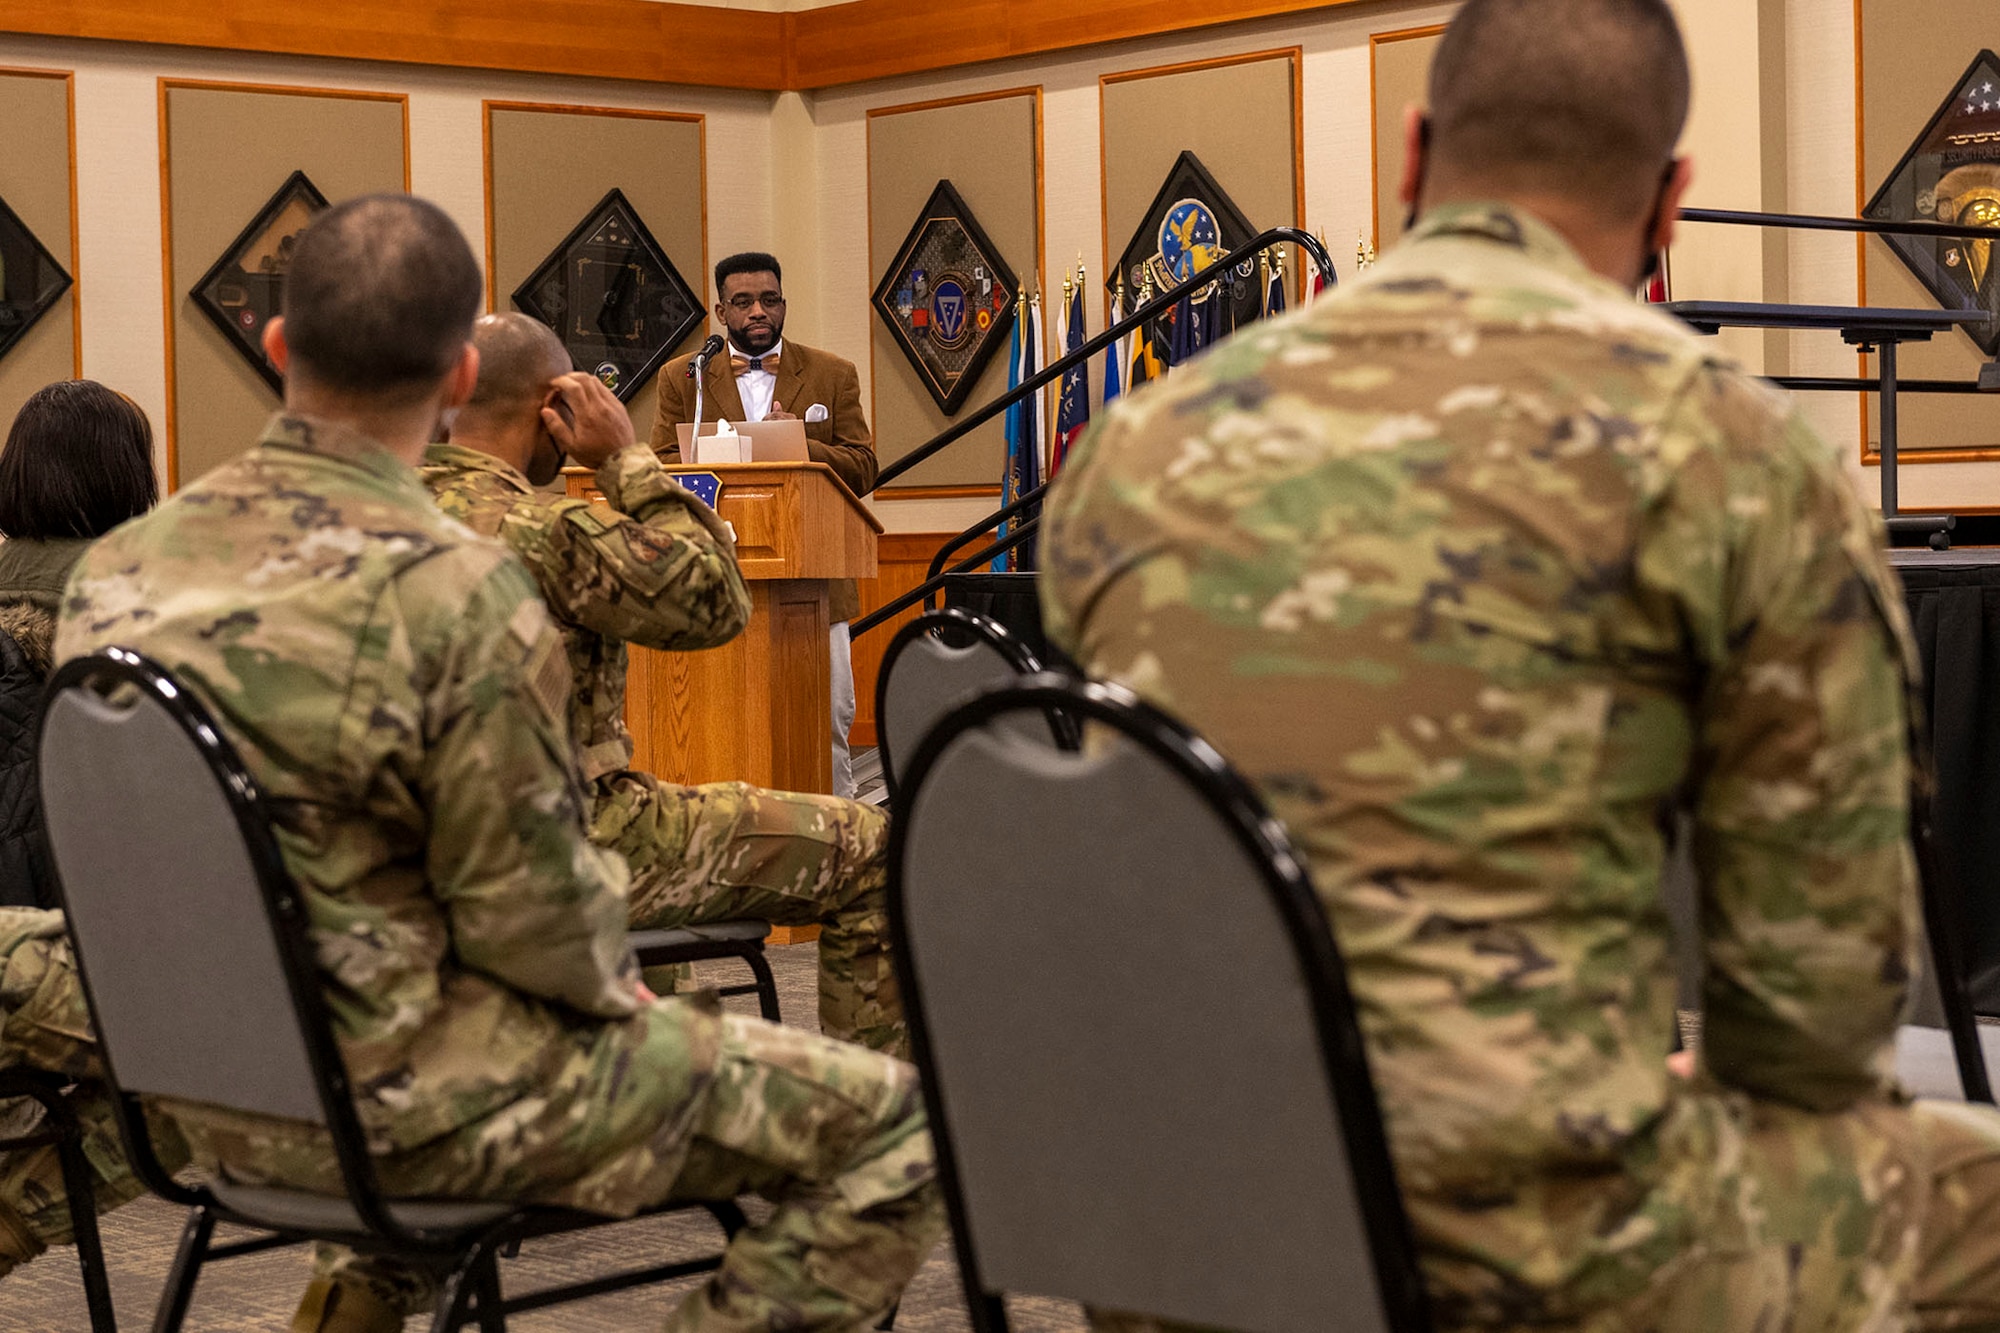 Bishop Marcus Collins led a presentation to base at the Martin Luther King Jr. diversity and inclusion equity workshop Jan. 19, 2022, at Malmstrom Air Force Base, Mont.